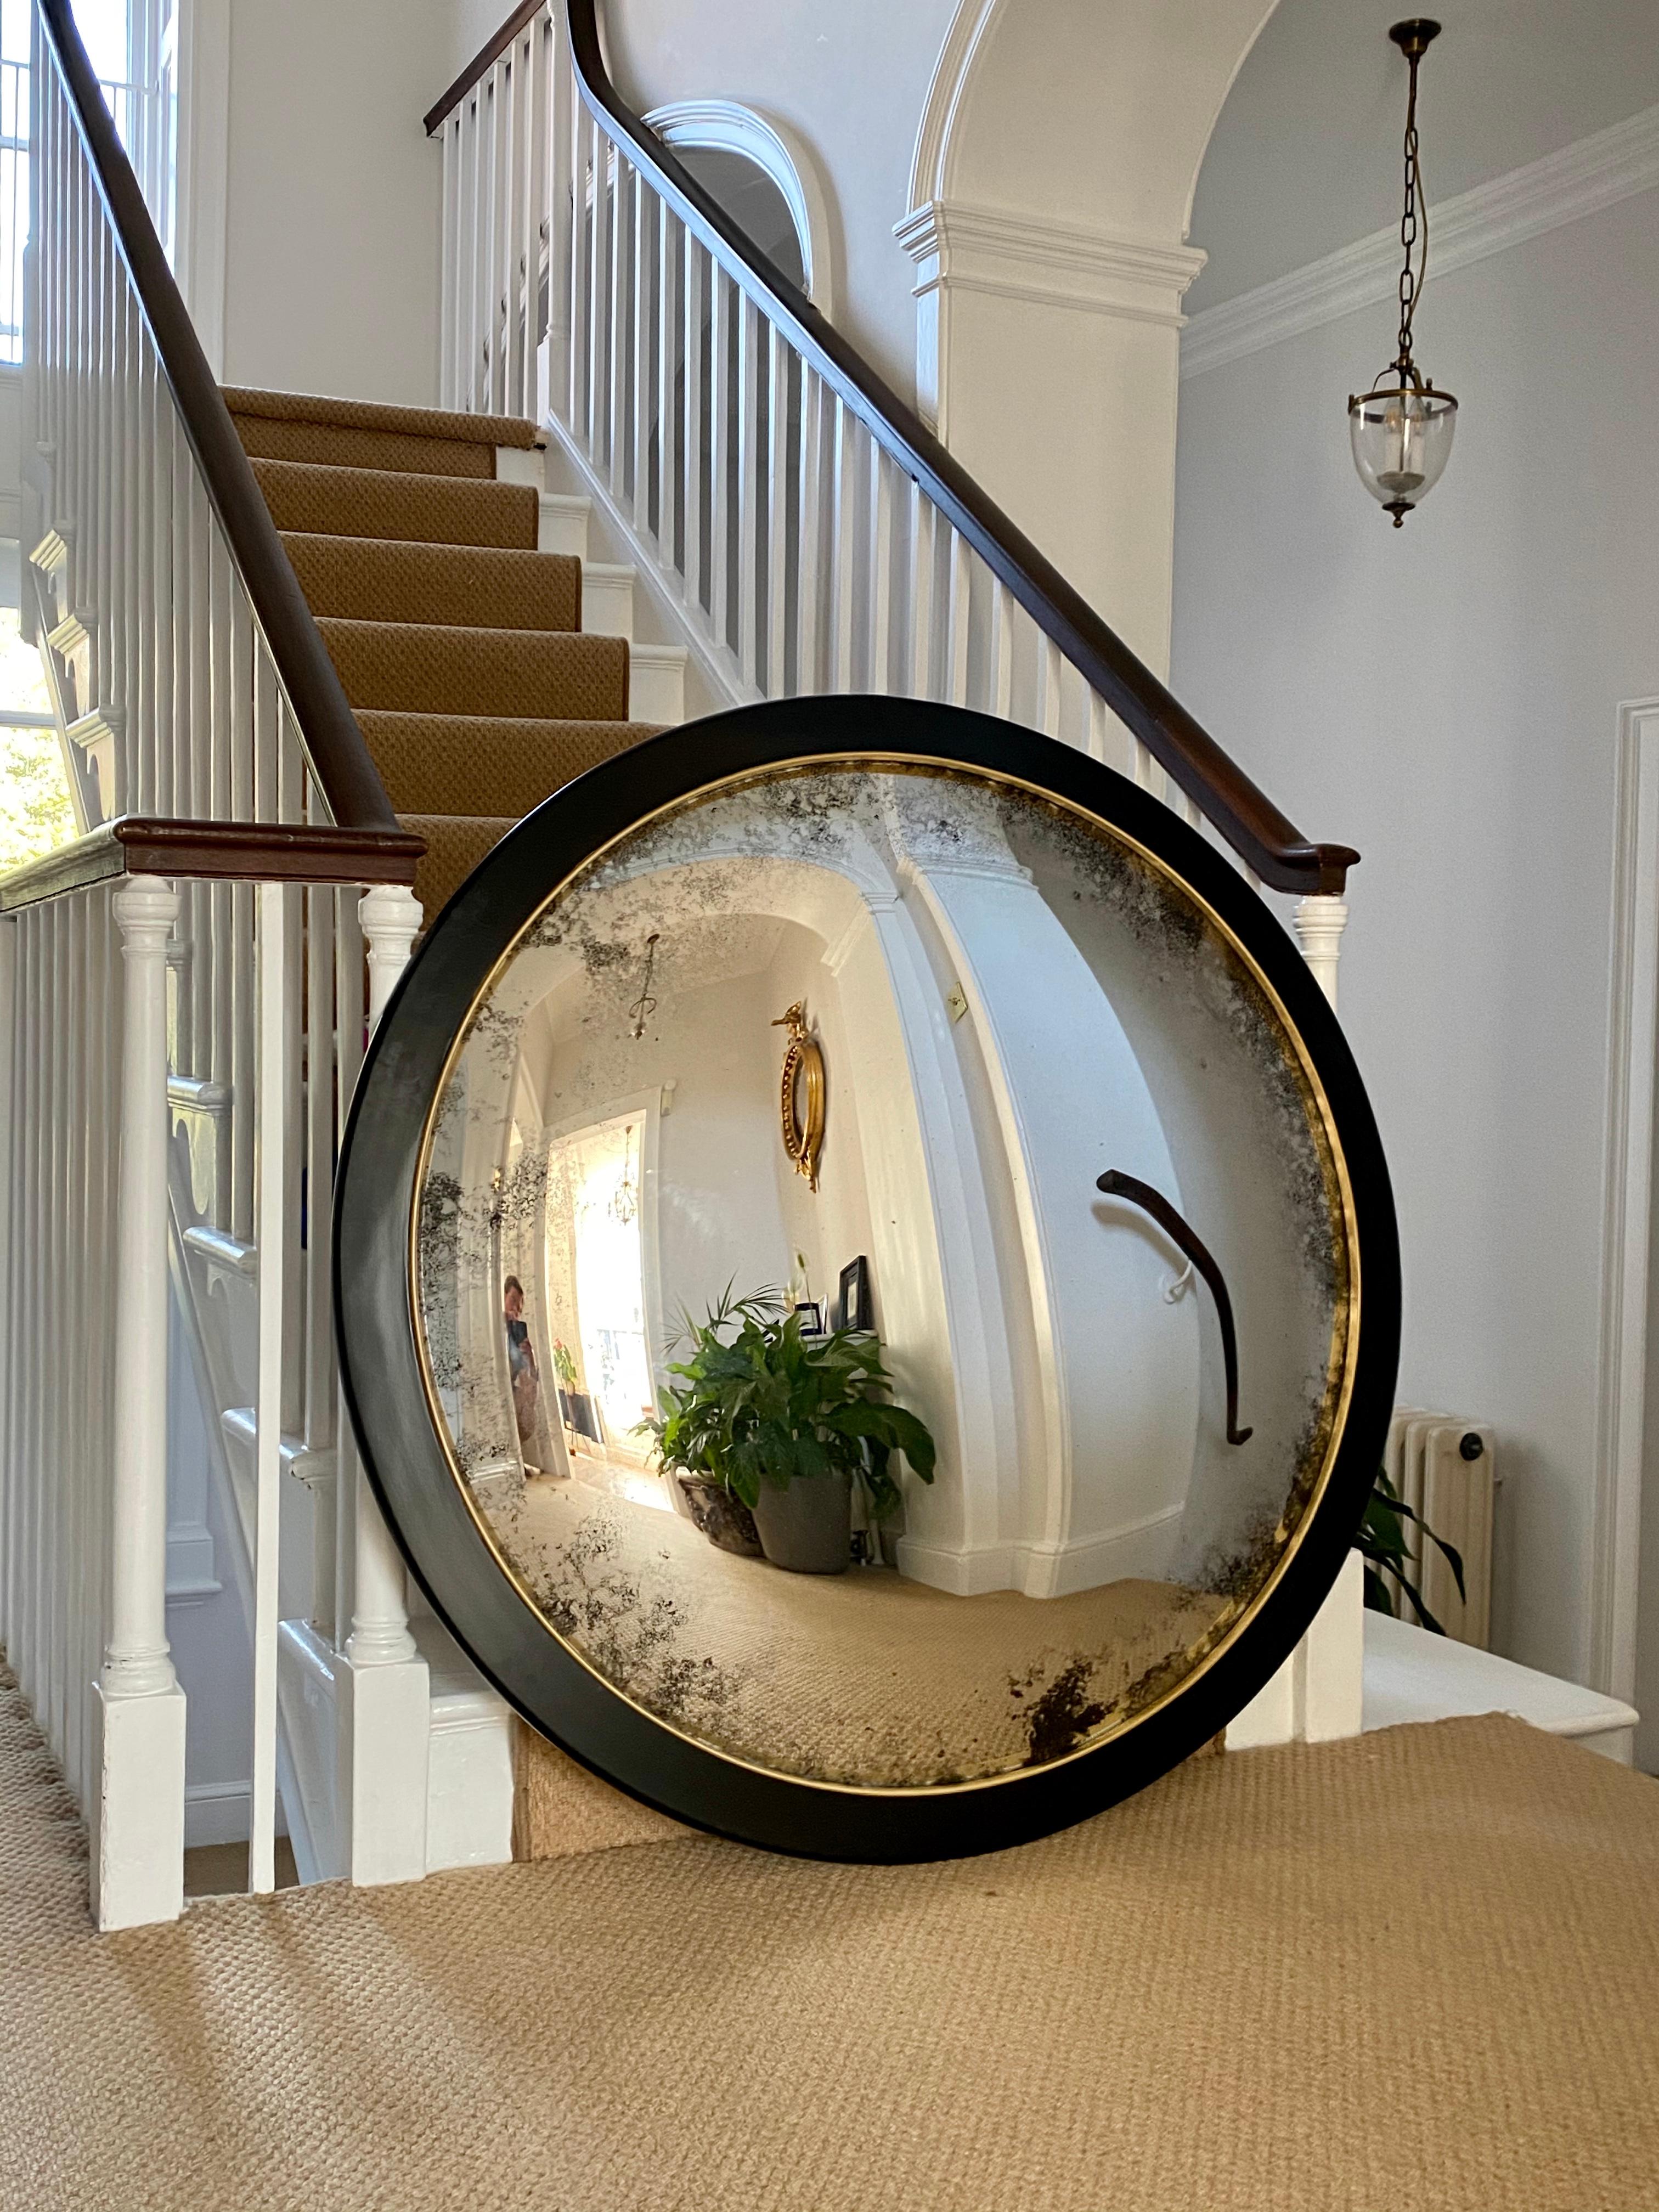 The Ferrara Nero is a highly decorative convex wall mirror that creates a focal point and adds elegance to any room. 

The mirror itself is silvered using traditional methods and fabricated from 6mm low iron glass with a curvature of 7 cms. 

The